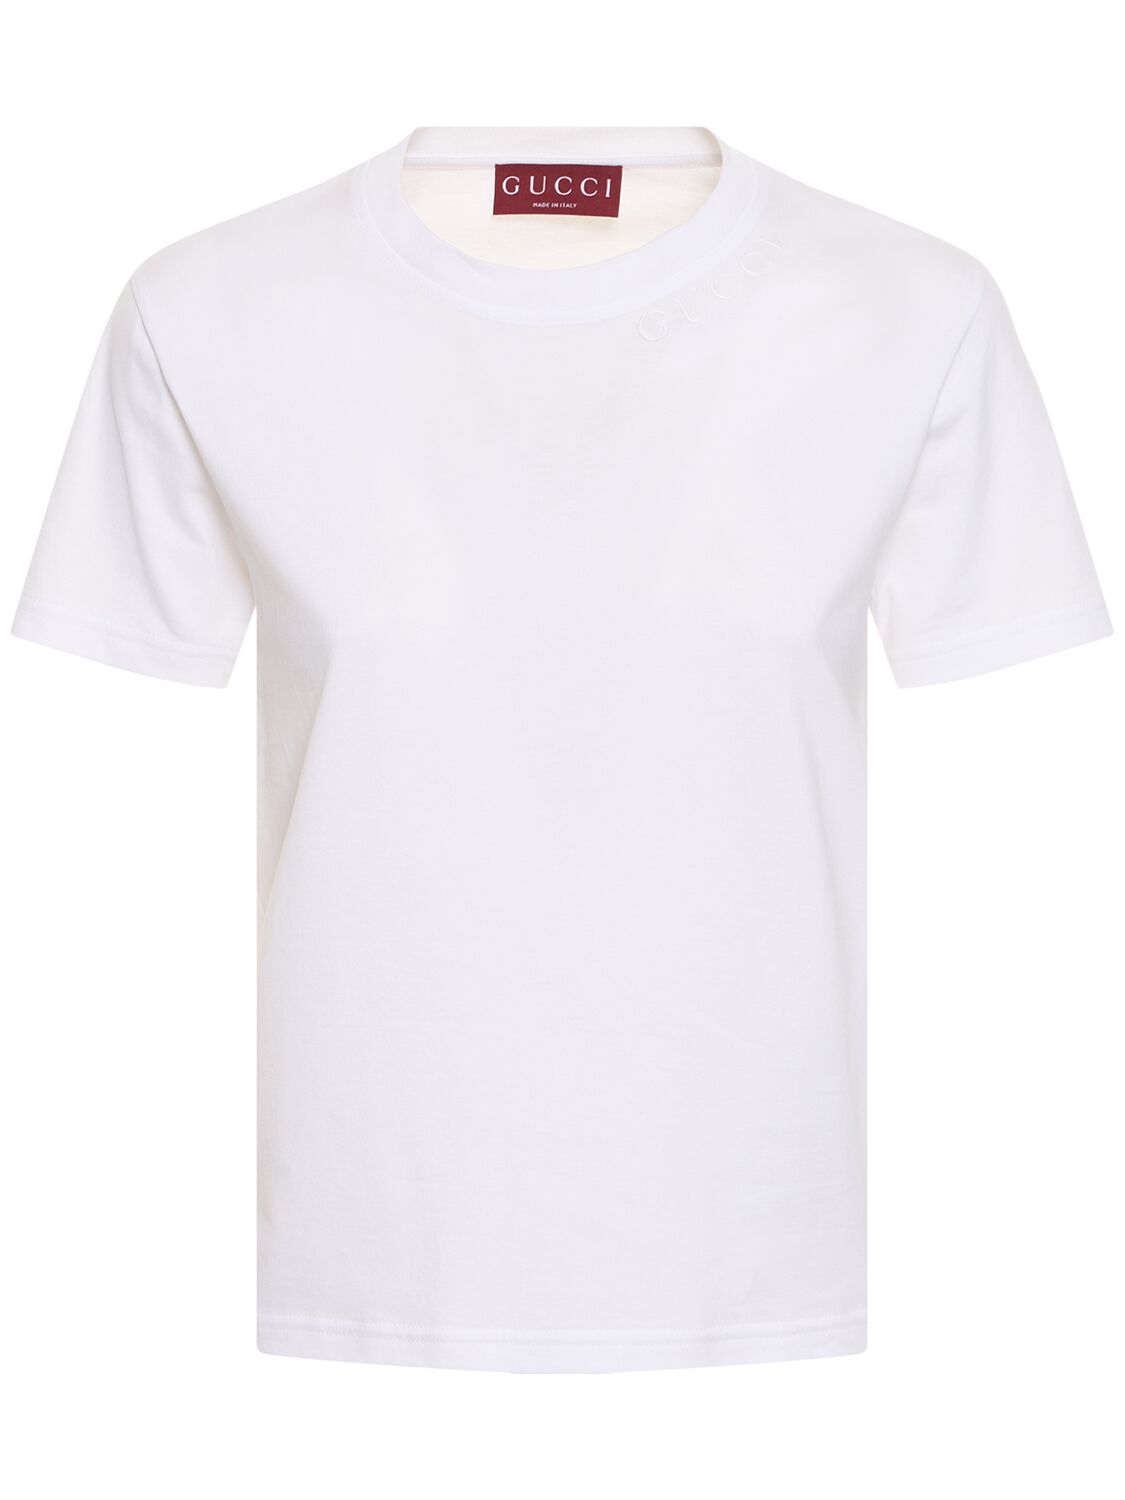 Gucci New 70s Cotton Jersey T-shirt In White